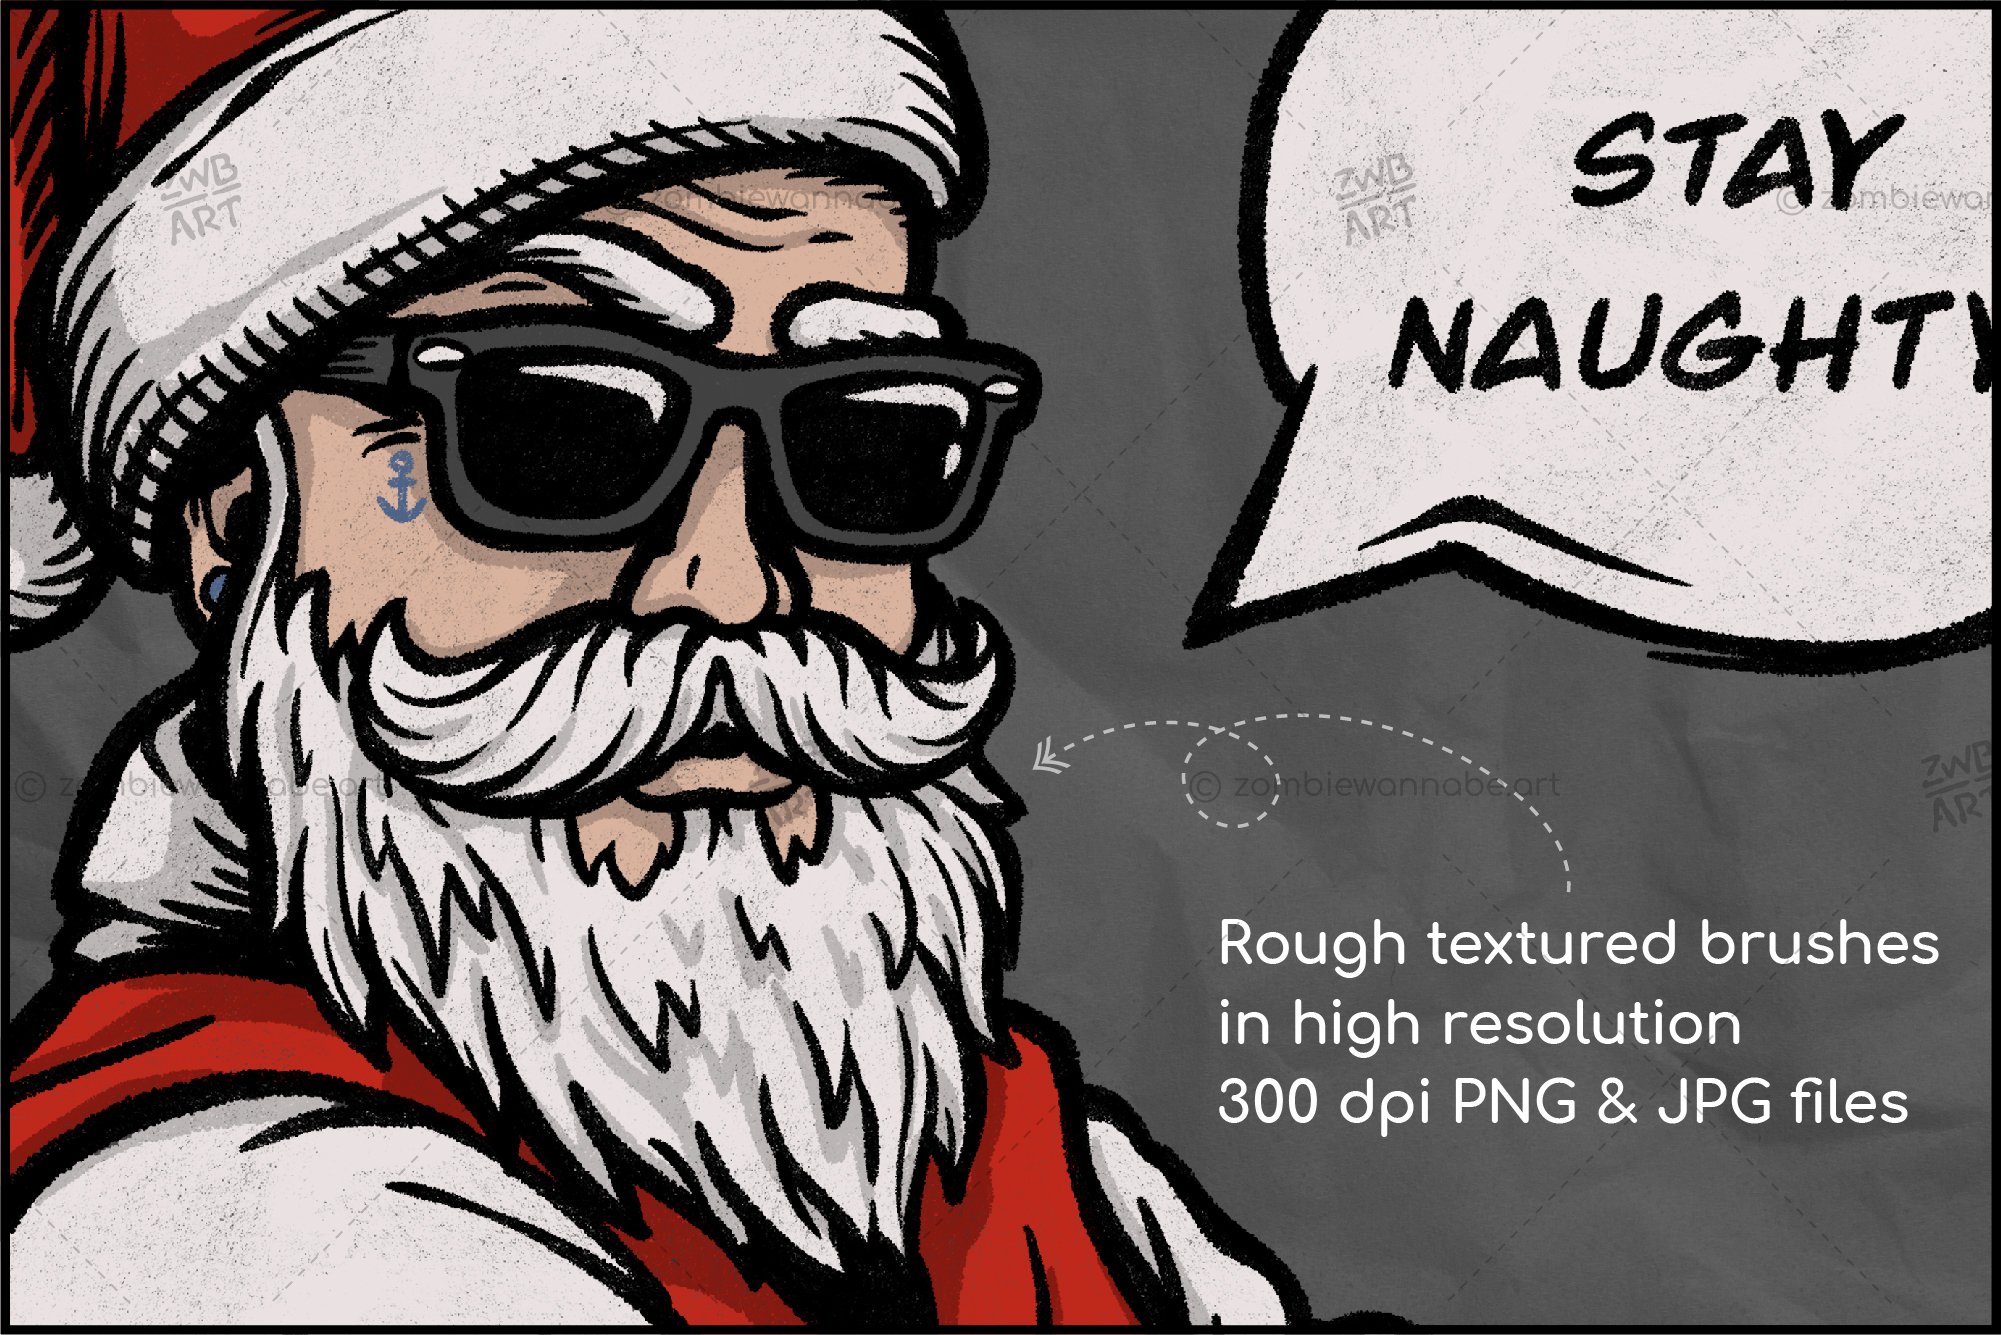 Colorful image of a manly Santa's head with a charming beard.